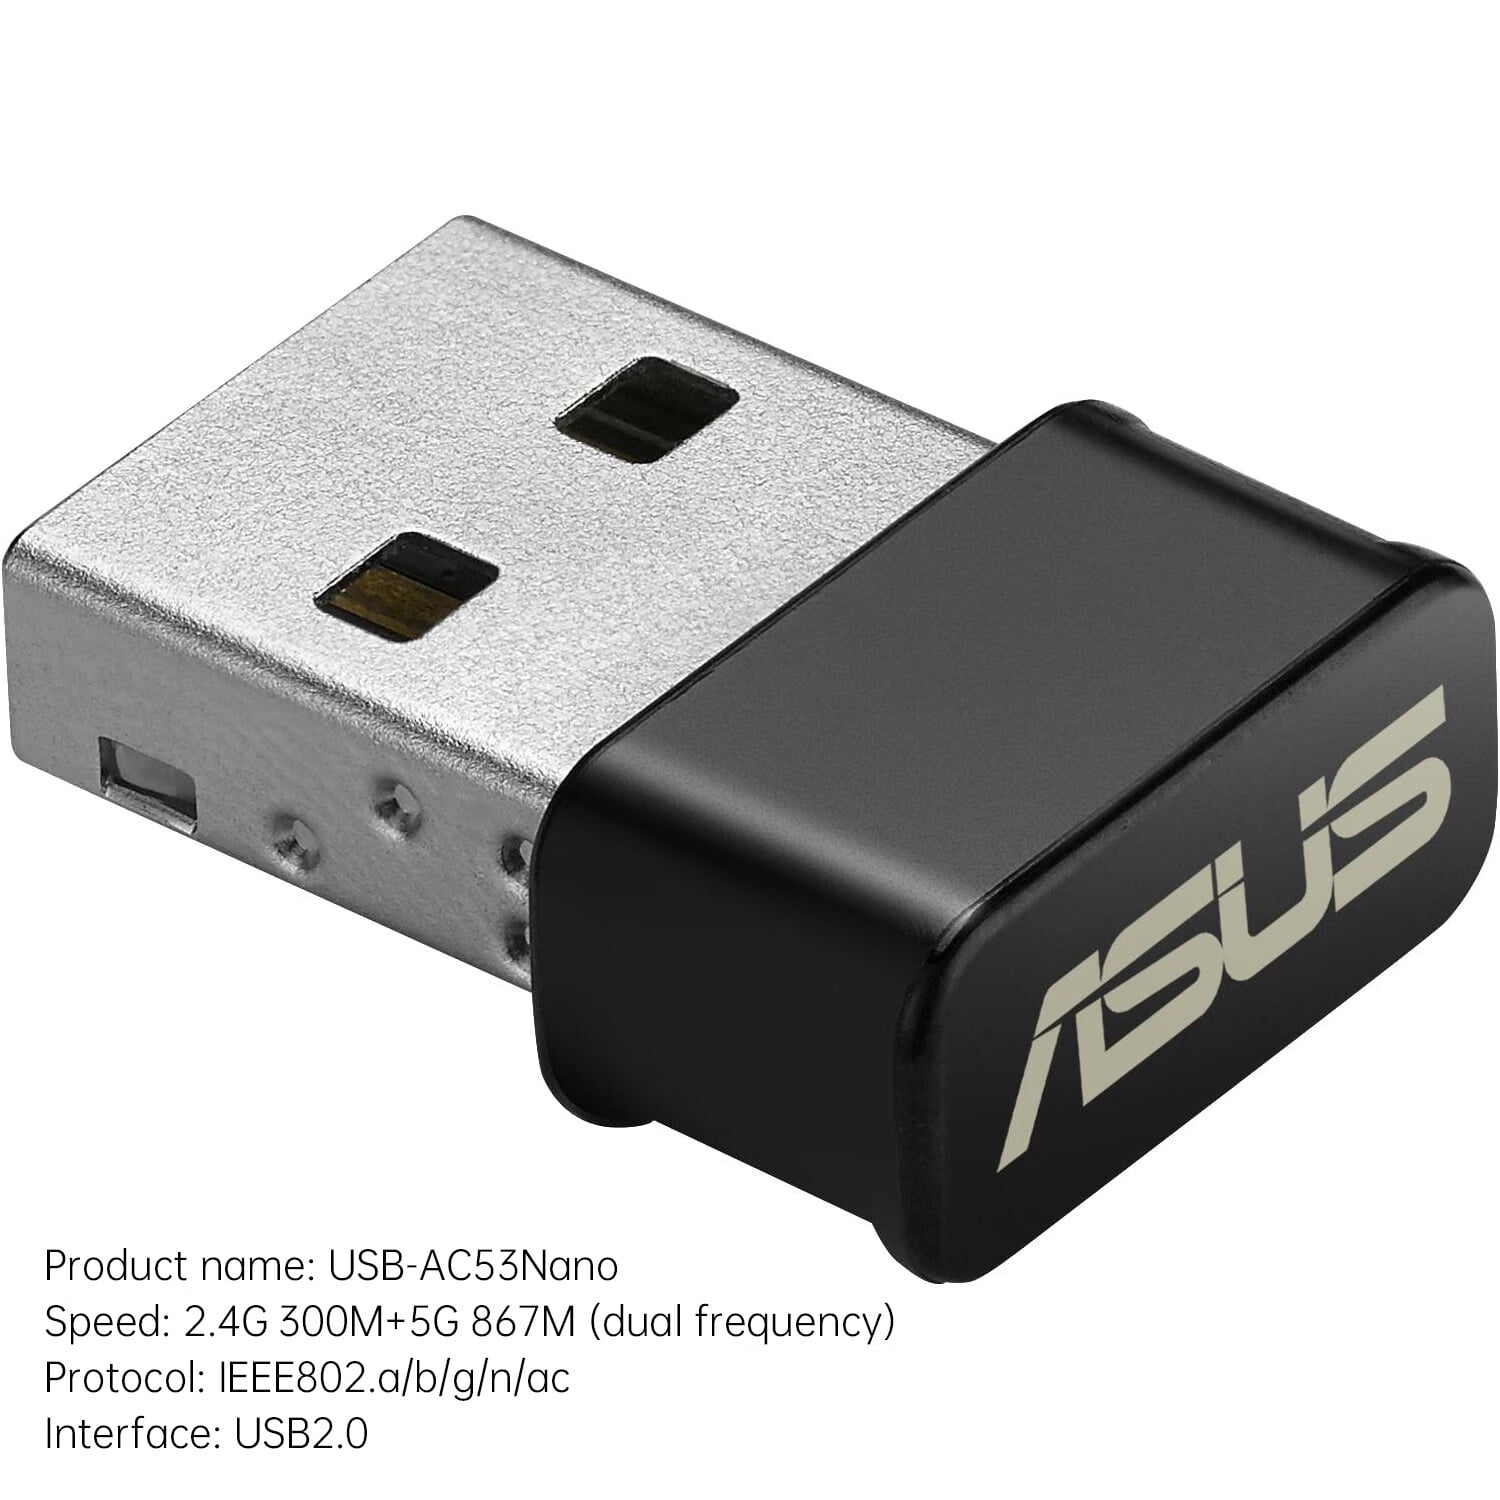 TITOUMI USB-AC53 USB Dual Band Wirel Adapter, Compatible with Windows XP/Vista/7/8/1/10, Black - image 1 of 7